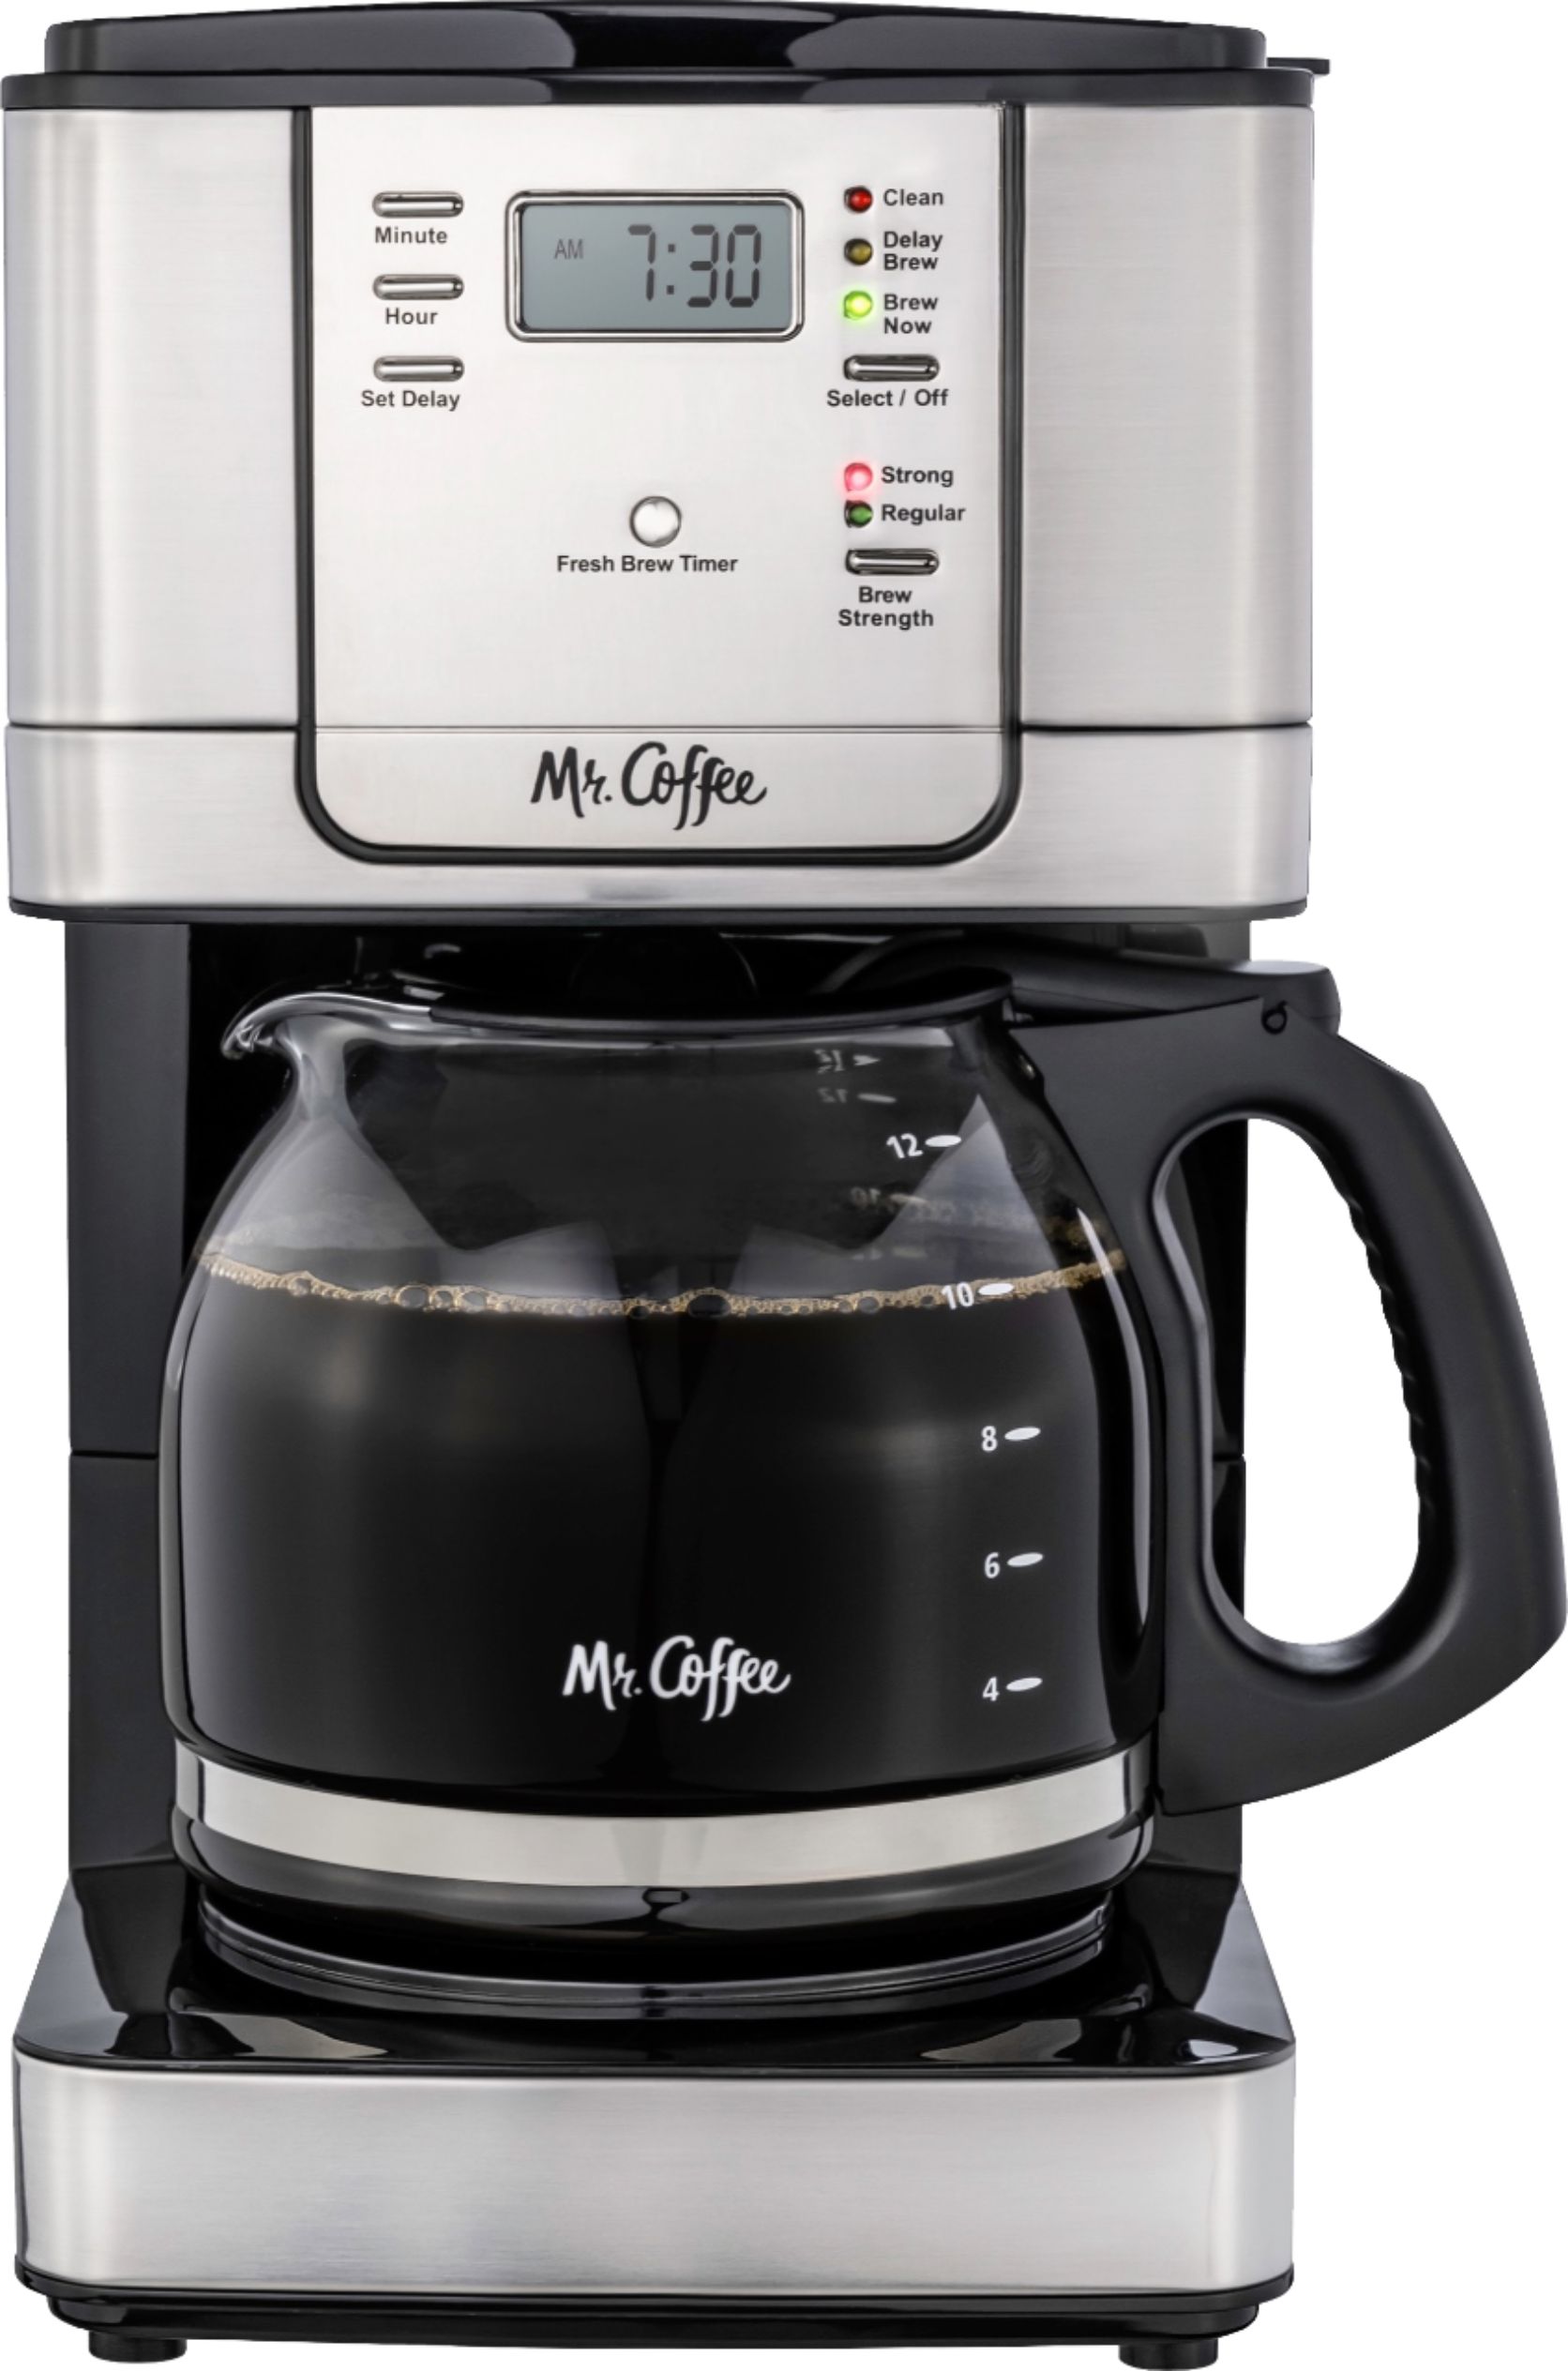 Mr. Coffee 12-Cup Coffee Maker with Strong Brew Selector Stainless